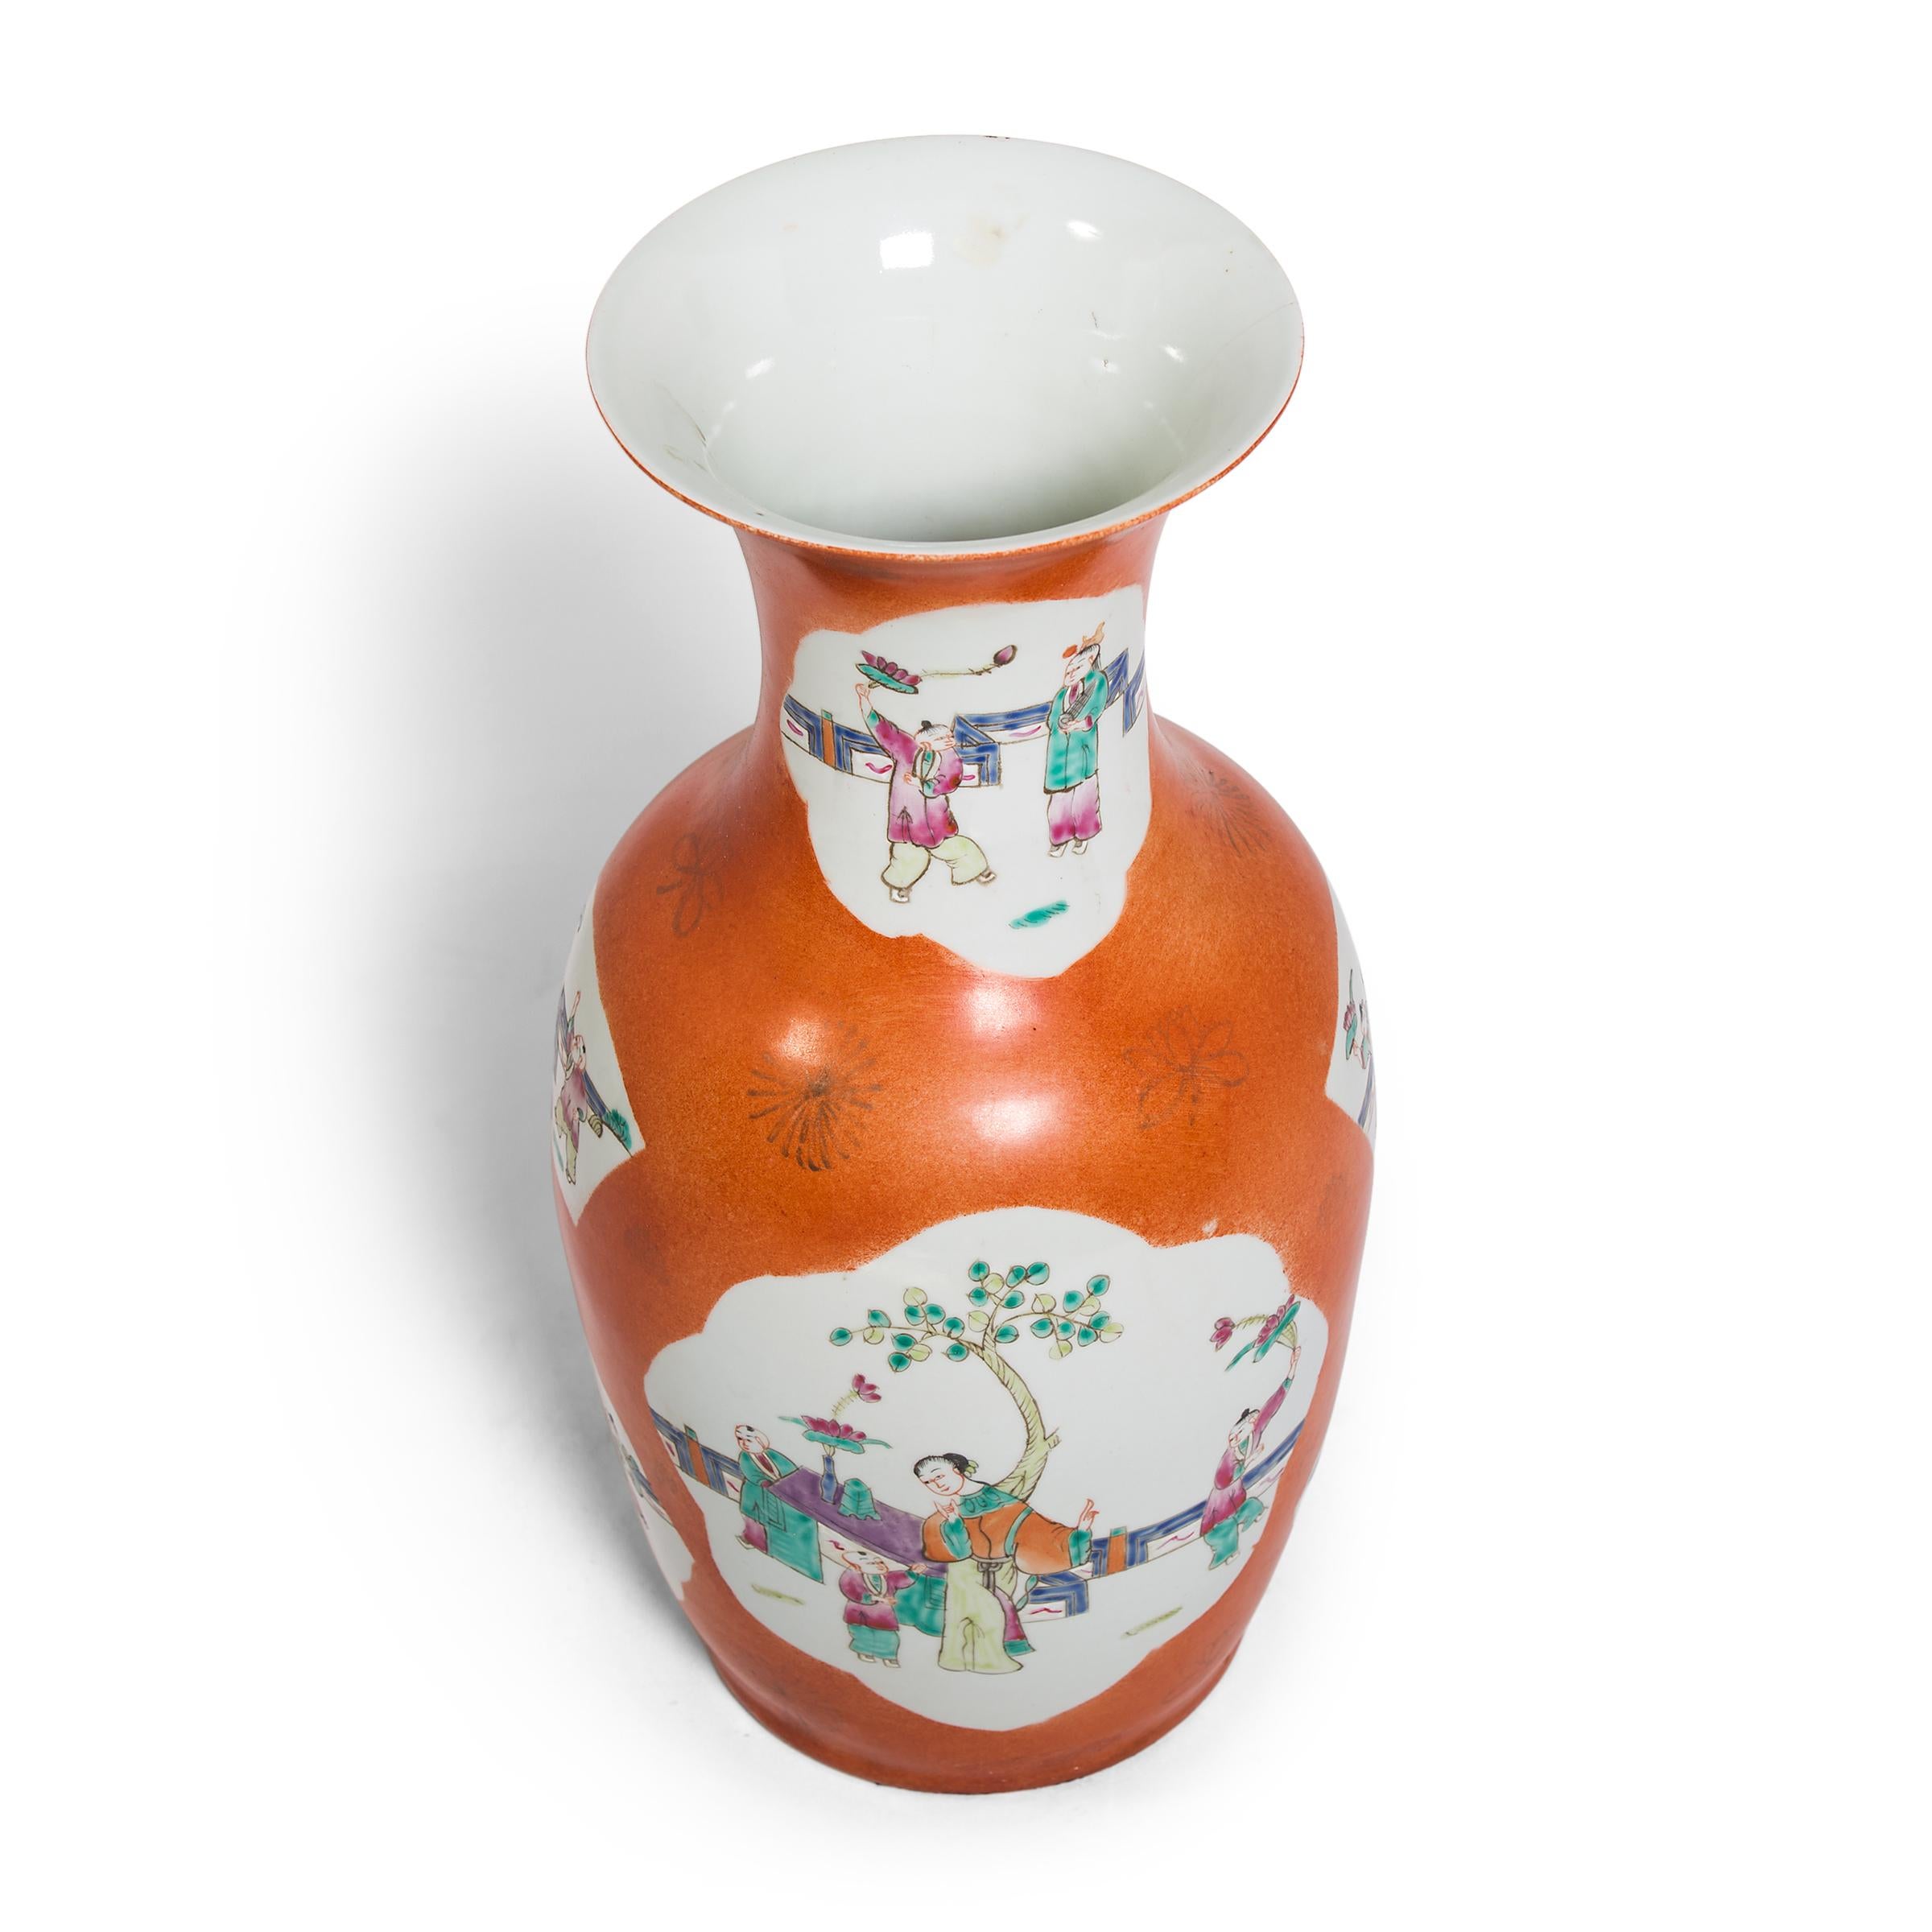 20th Century Chinese Persimmon Phoenix Tail Vase with Cartouche Paintings, c. 1920s For Sale